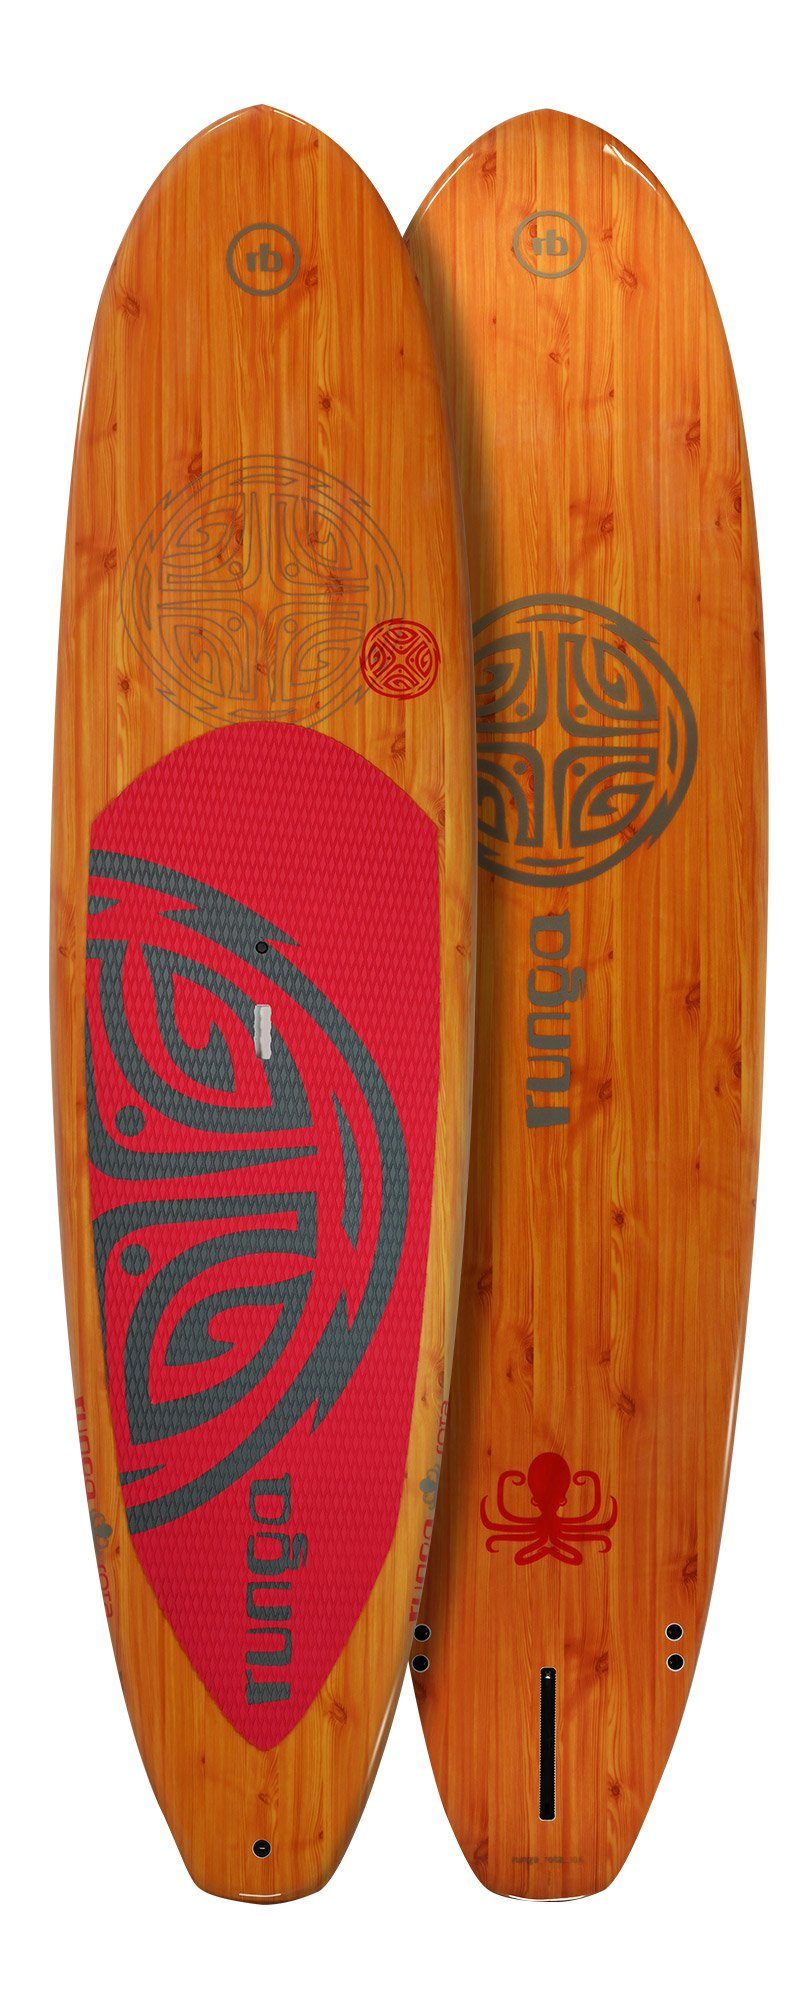 Runga-Boards SUP-Board ROTA RED Hard Board Stand Up Paddling SUP, Allrounder, (9.6, Inkl. coiled leash & 3-tlg. Finnen-Set)